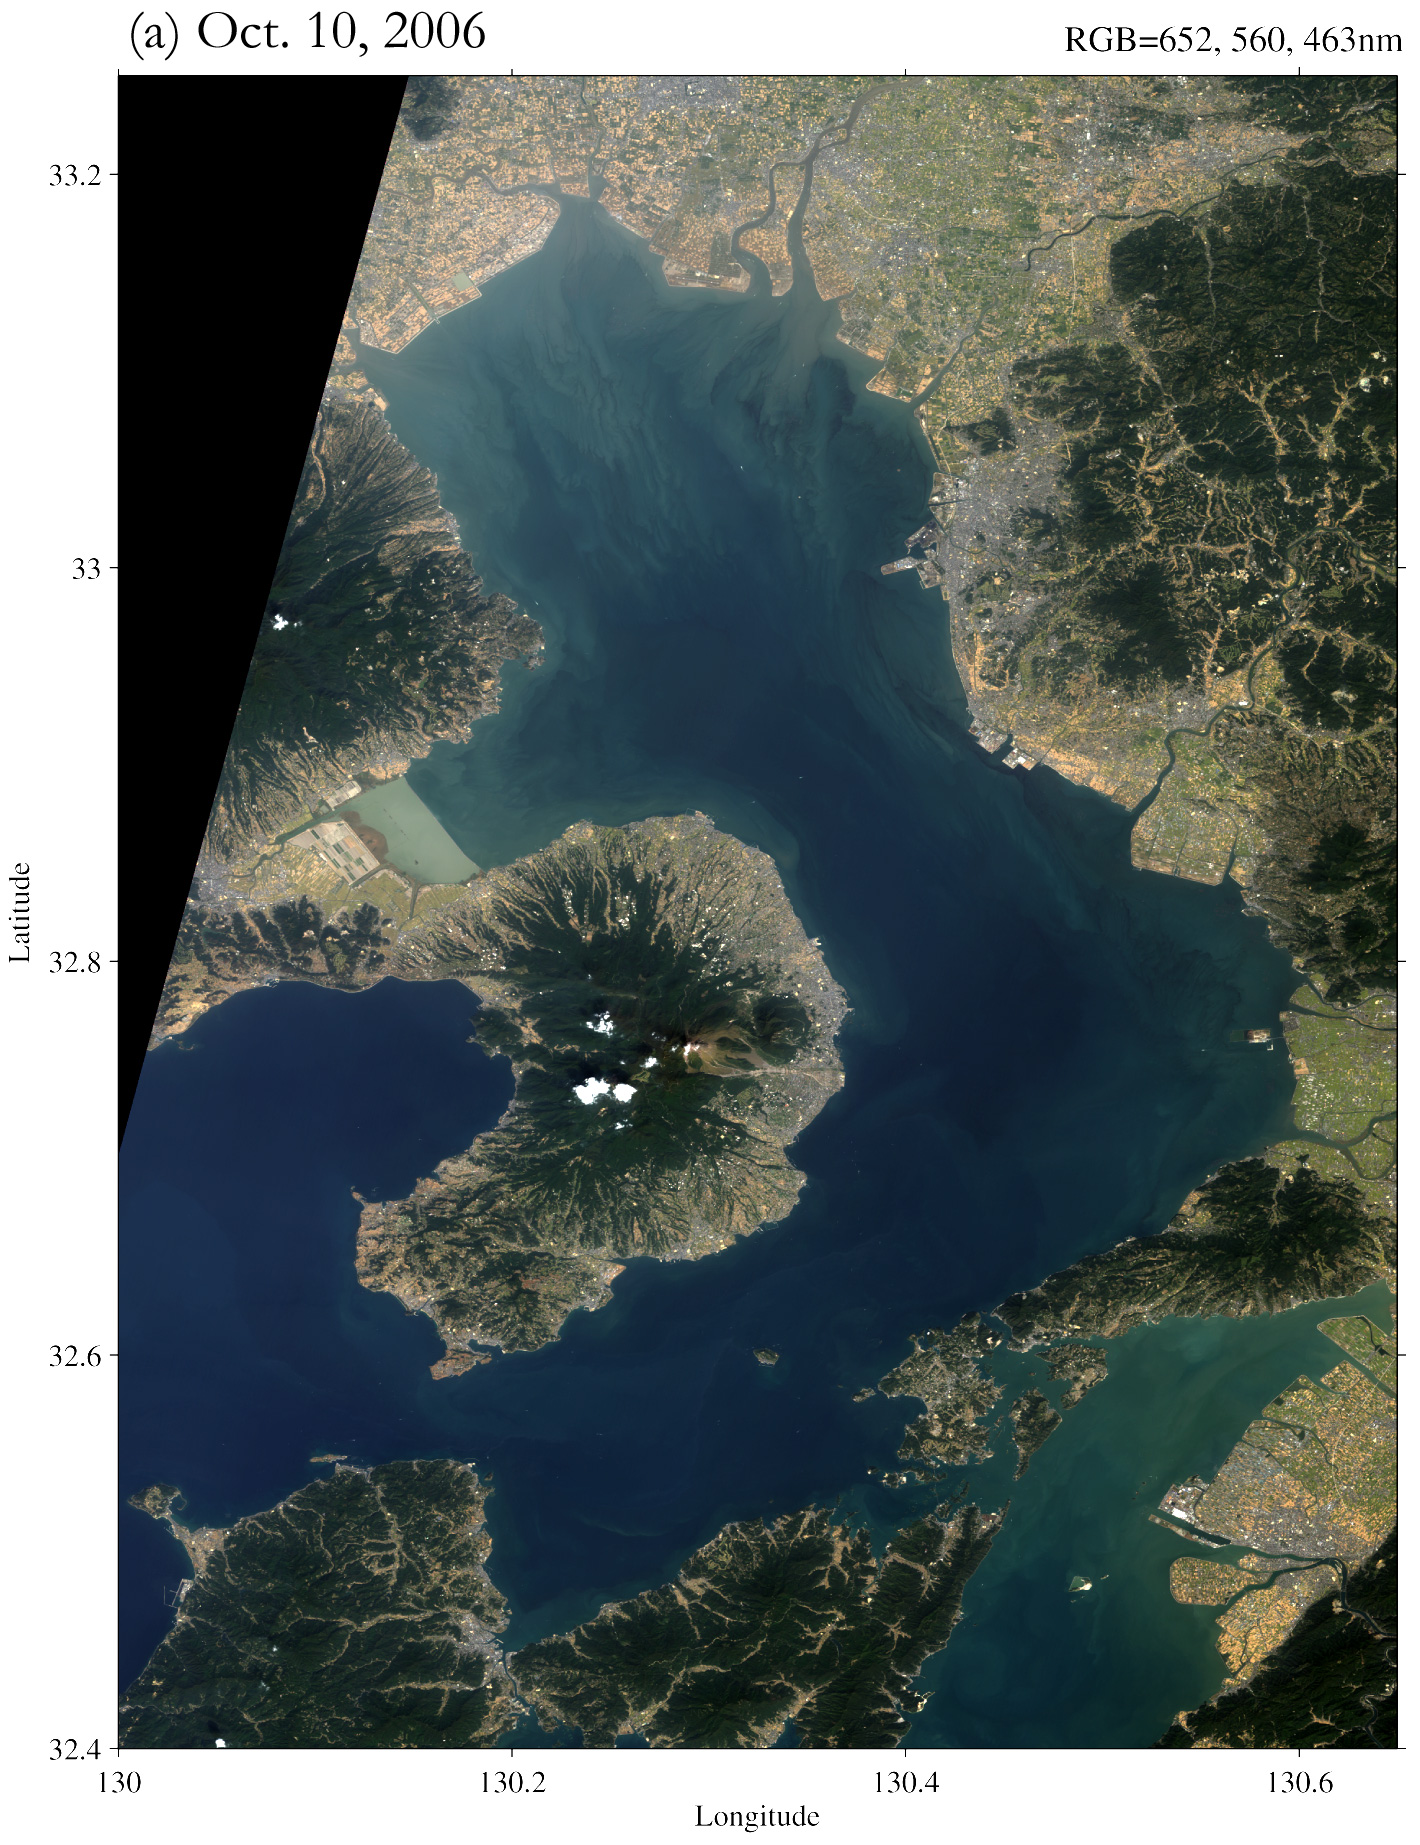 Fig.1: RGB images of the Ariake Sea on Oct. 10 in 2006 by AVNIR-2